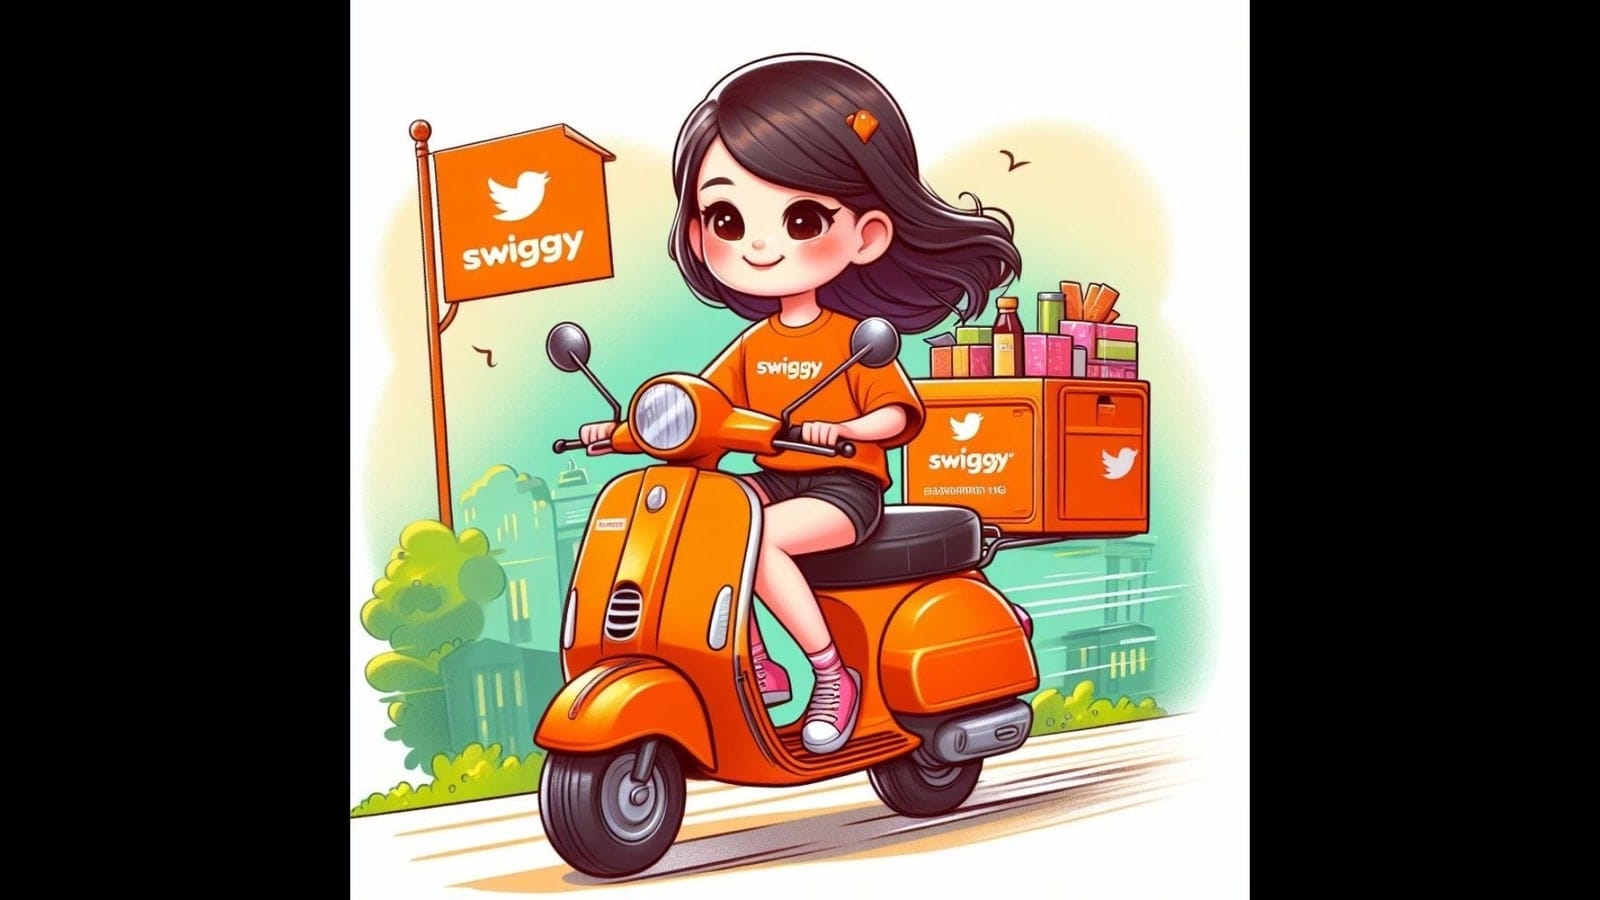 Bengaluru techie turns Swiggy delivery partner, lists 8 things she learned while on the job